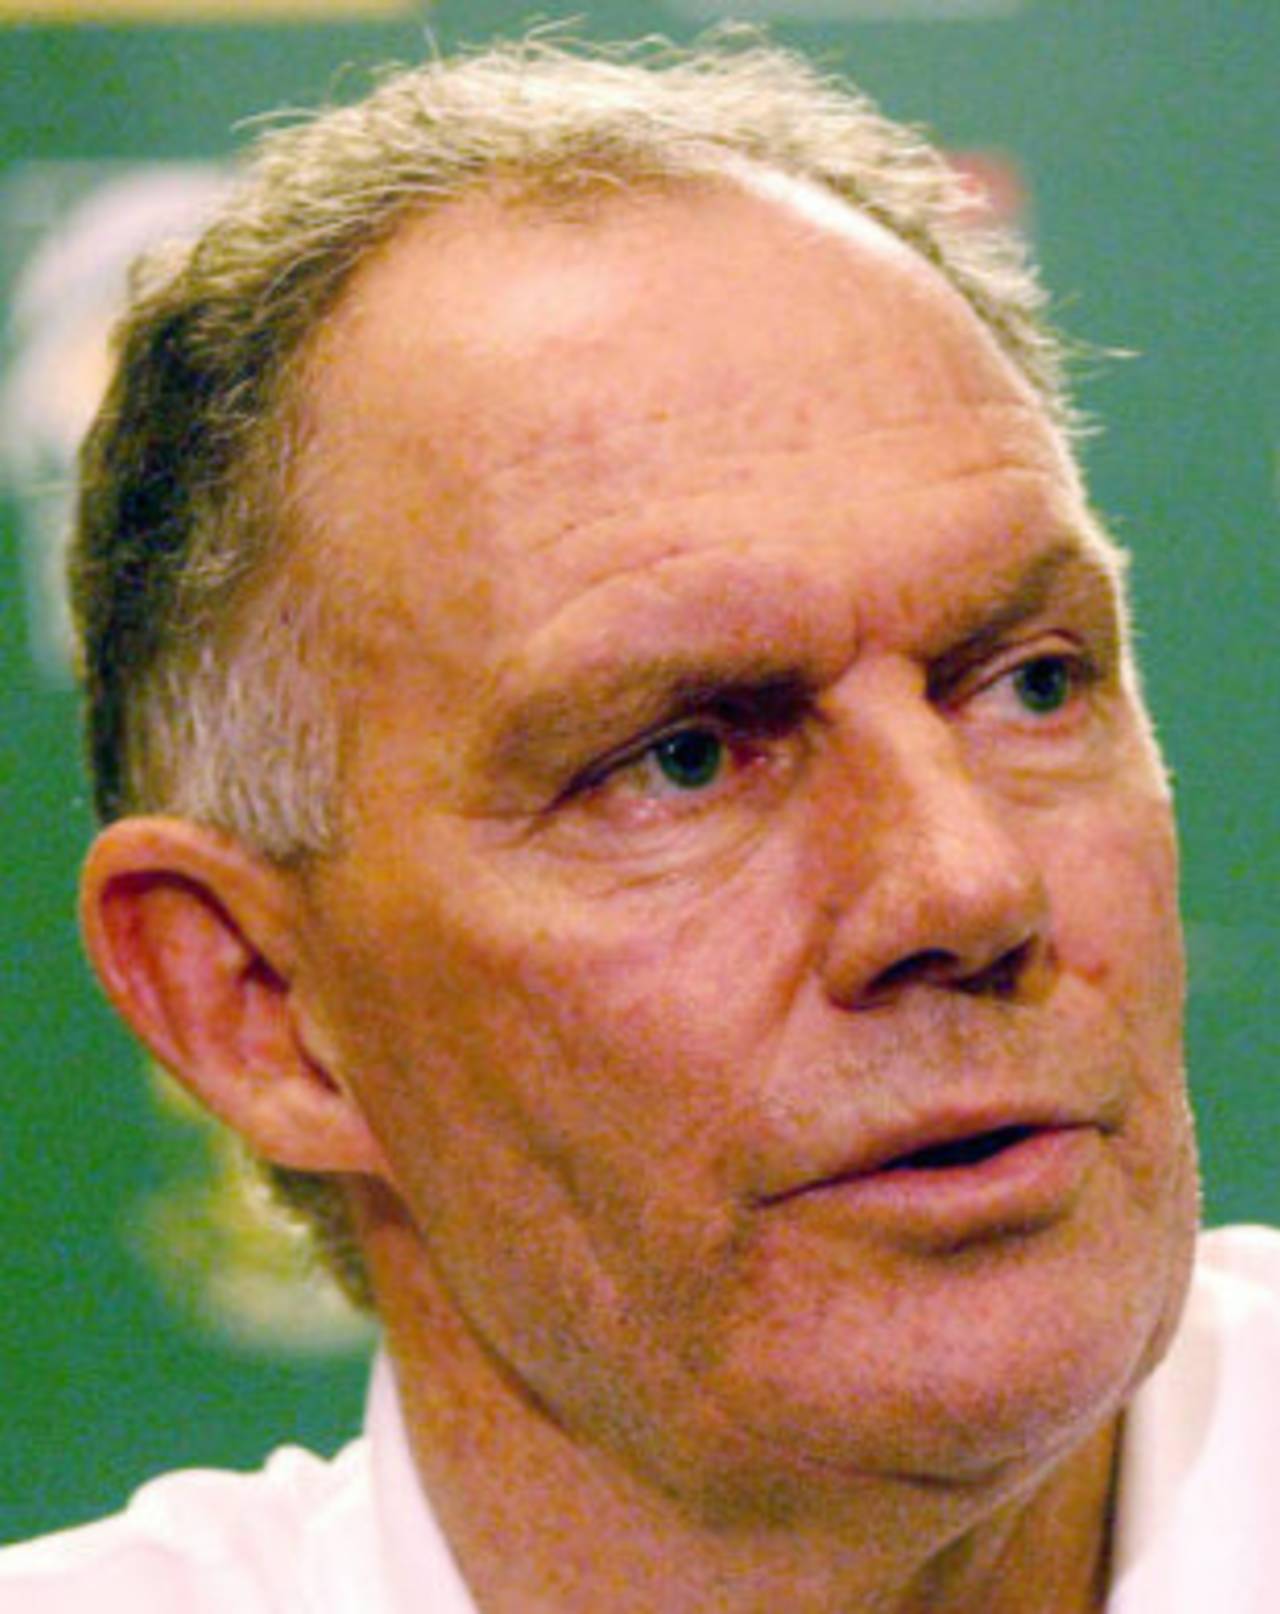 Greg Chappell faces the media shortly after India's arrival in Johannesburg, November 14, 2006